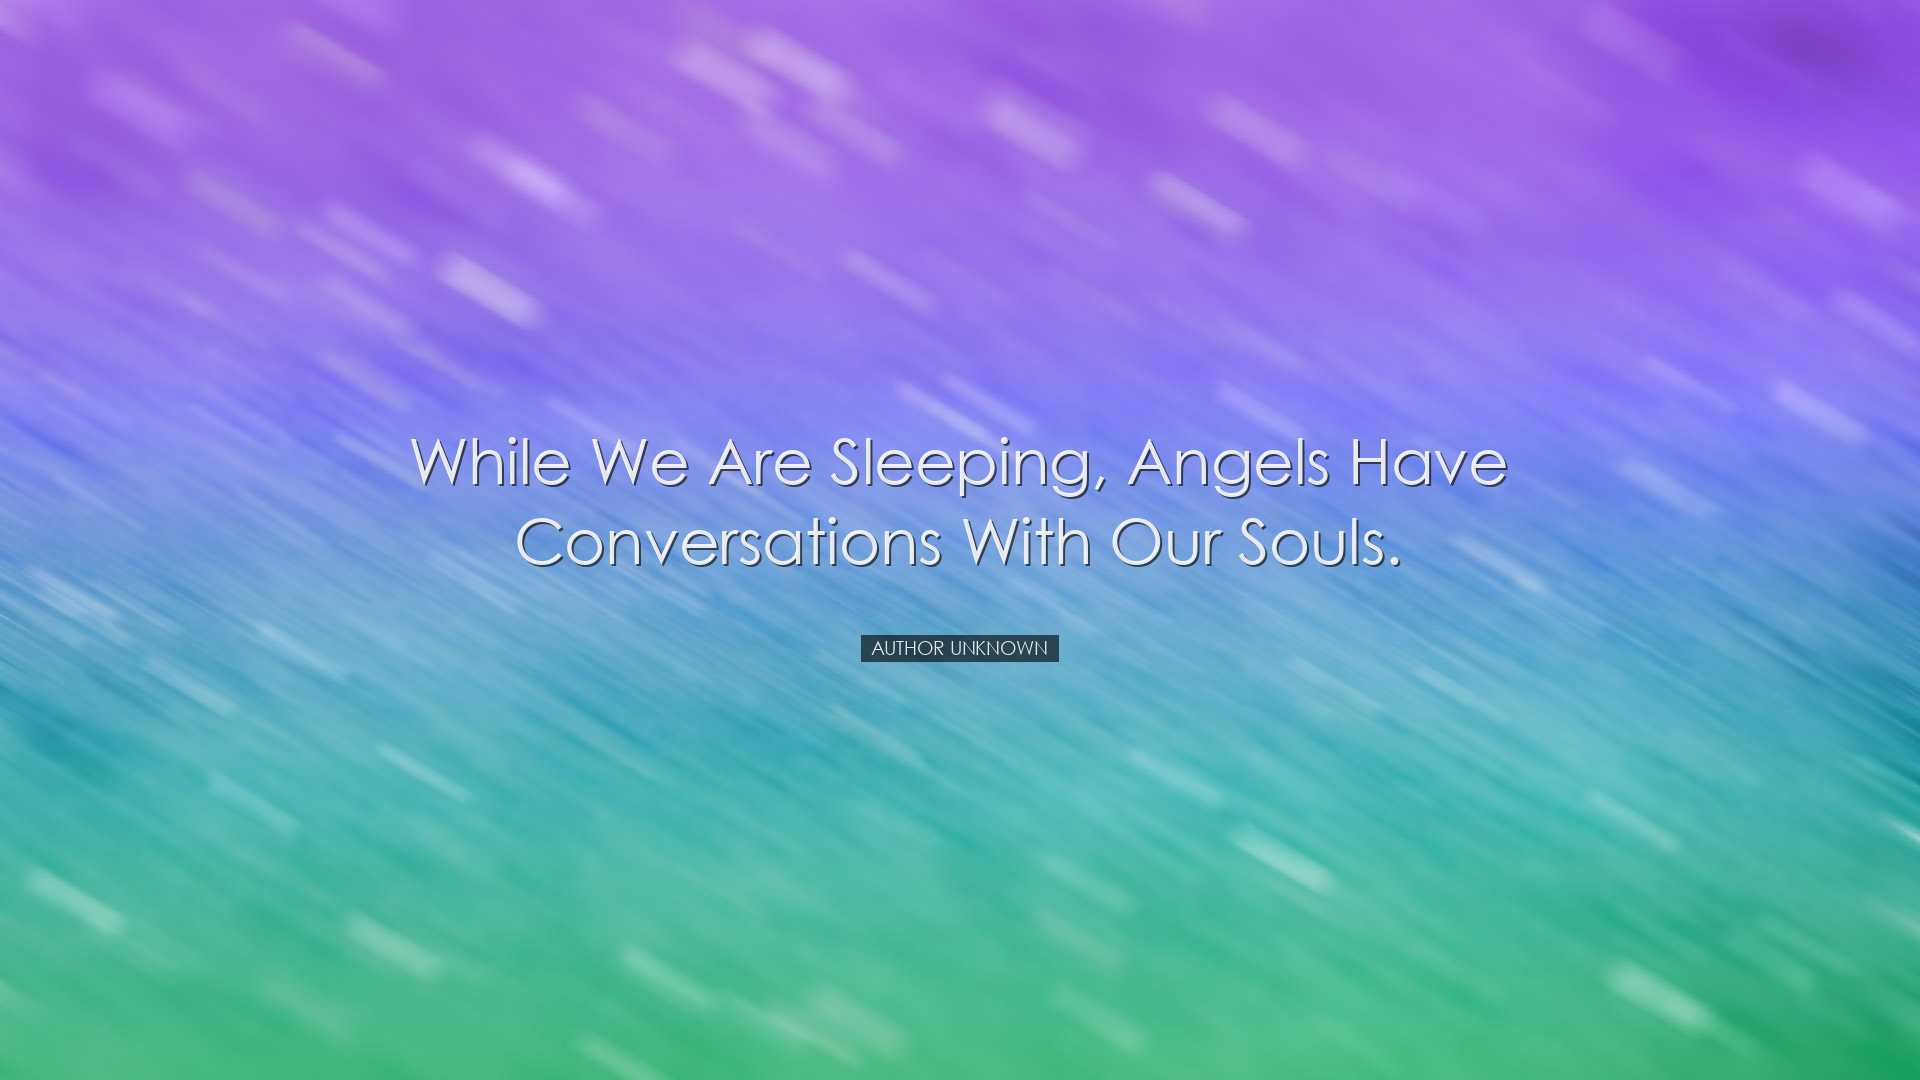 While we are sleeping, angels have conversations with our souls. -